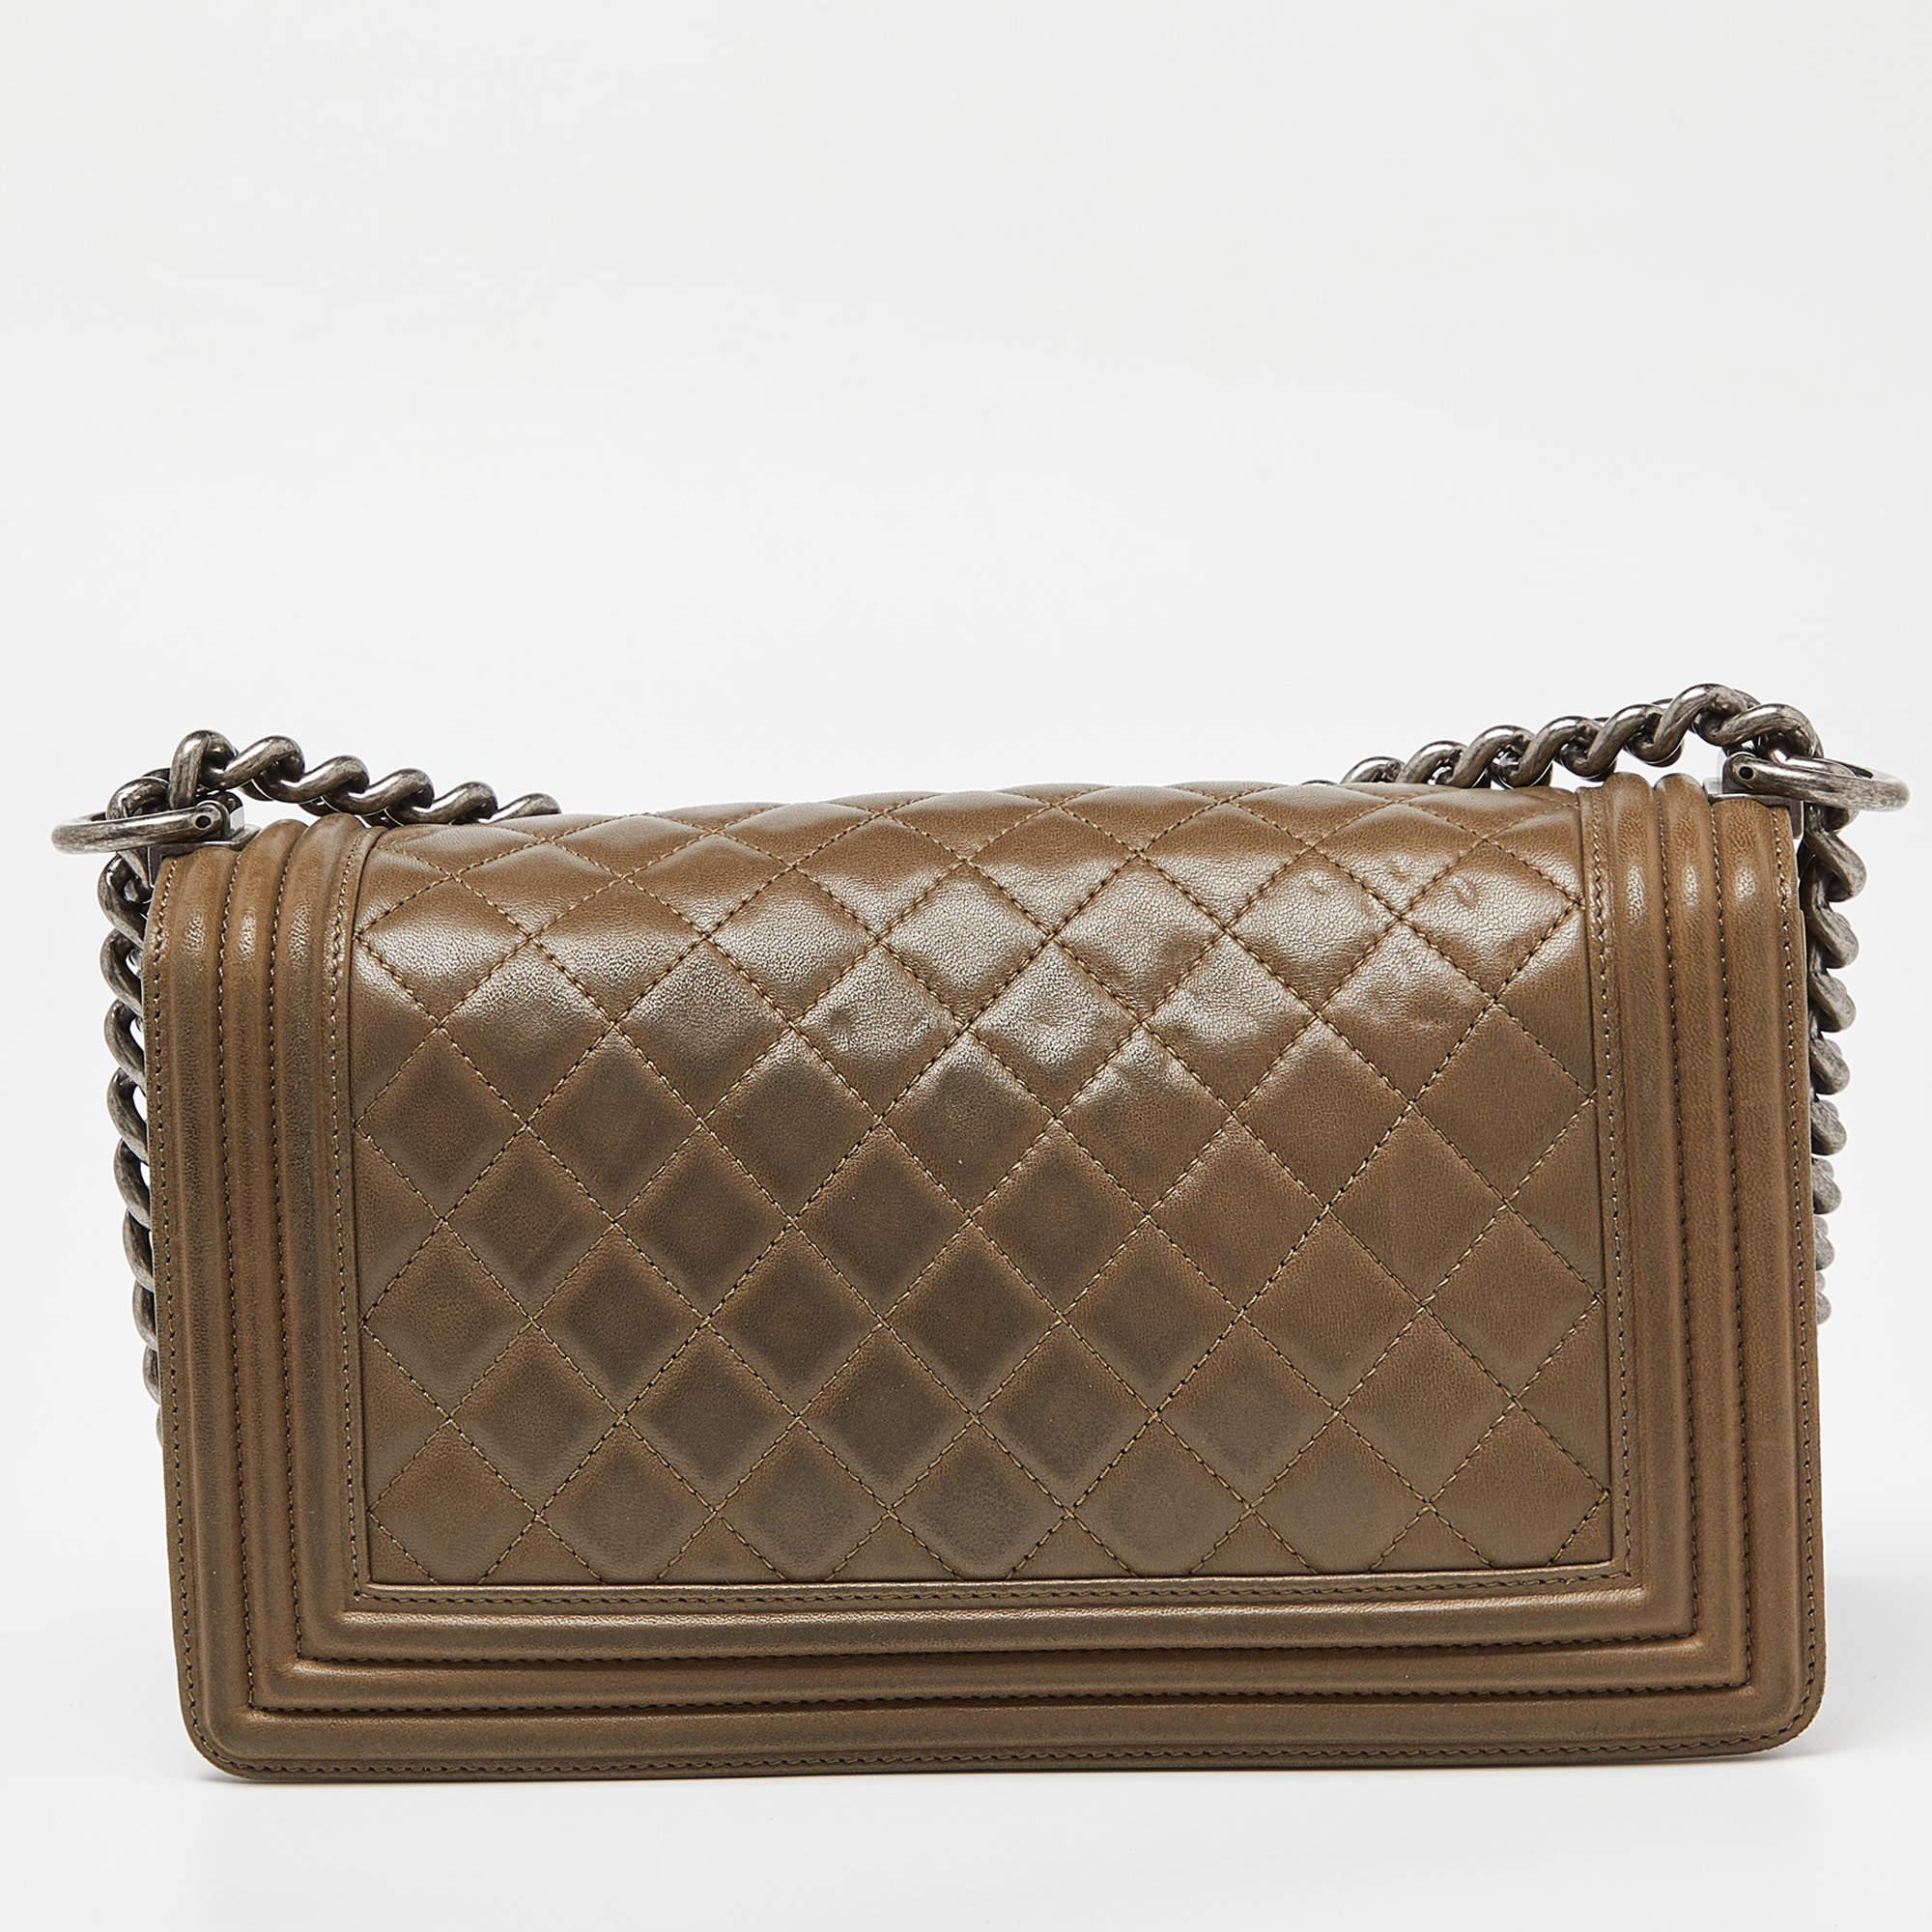 Chanel Green Quilted Leather Medium Boy Flap Bag In Good Condition For Sale In Dubai, Al Qouz 2